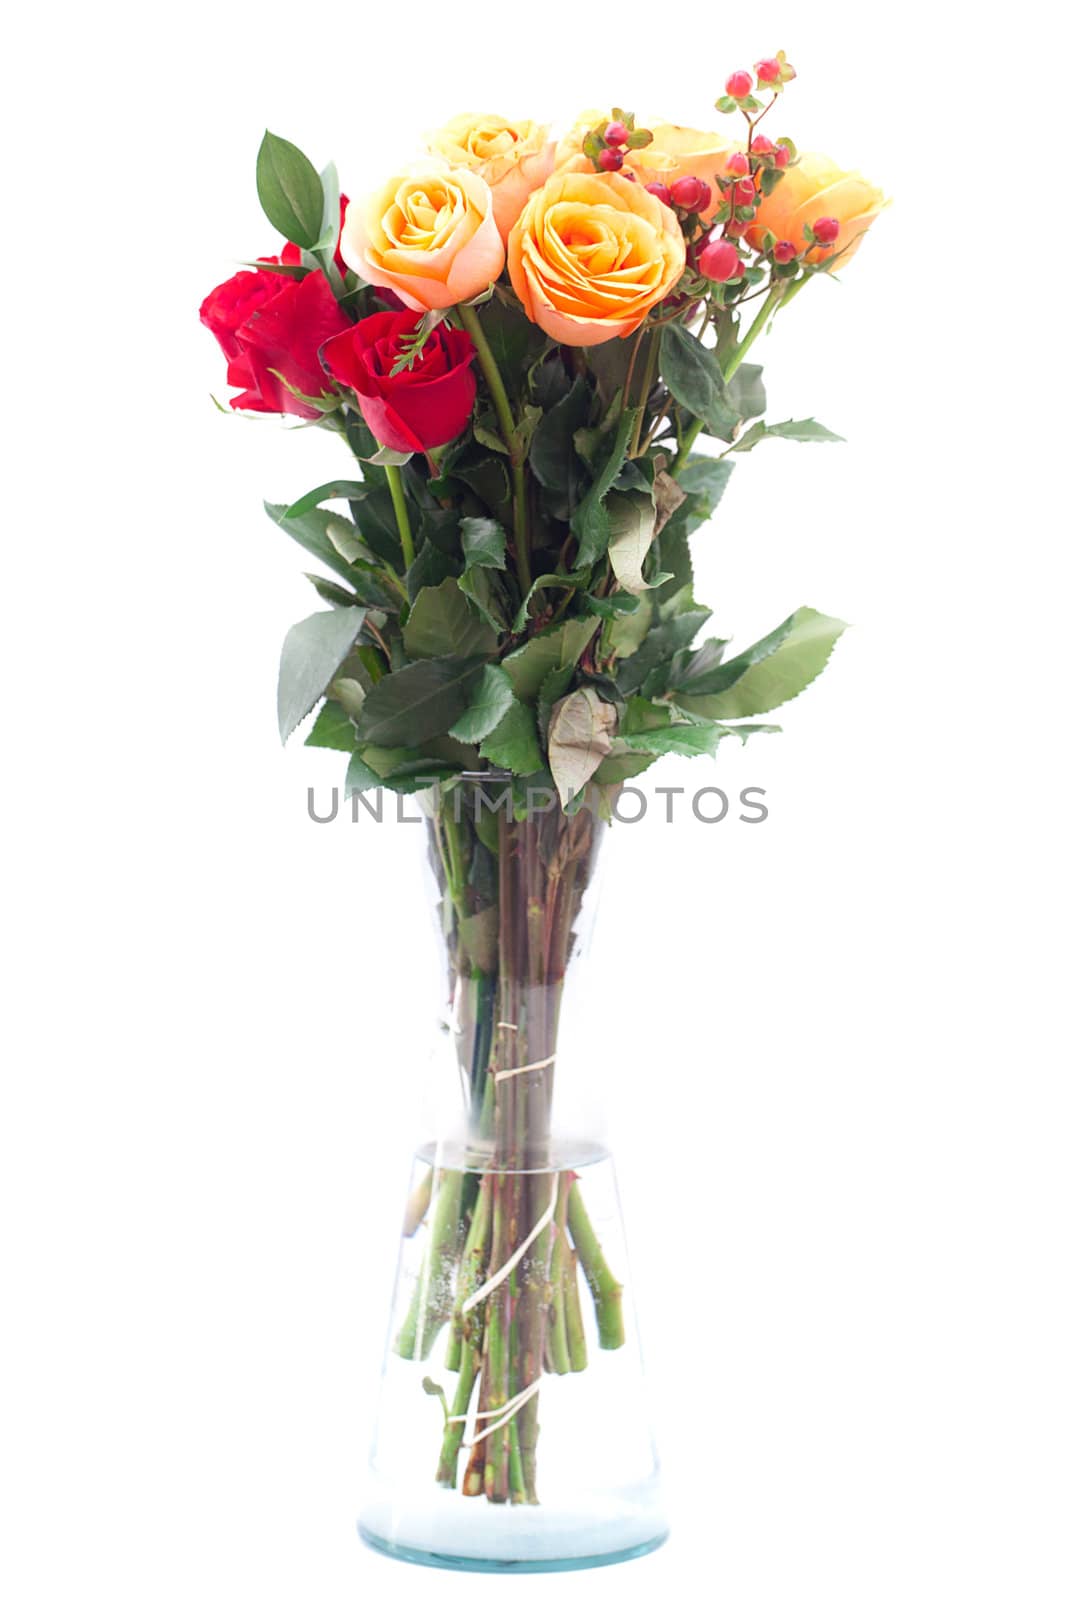 bouquet of colorful roses in a vase on white background by jannyjus